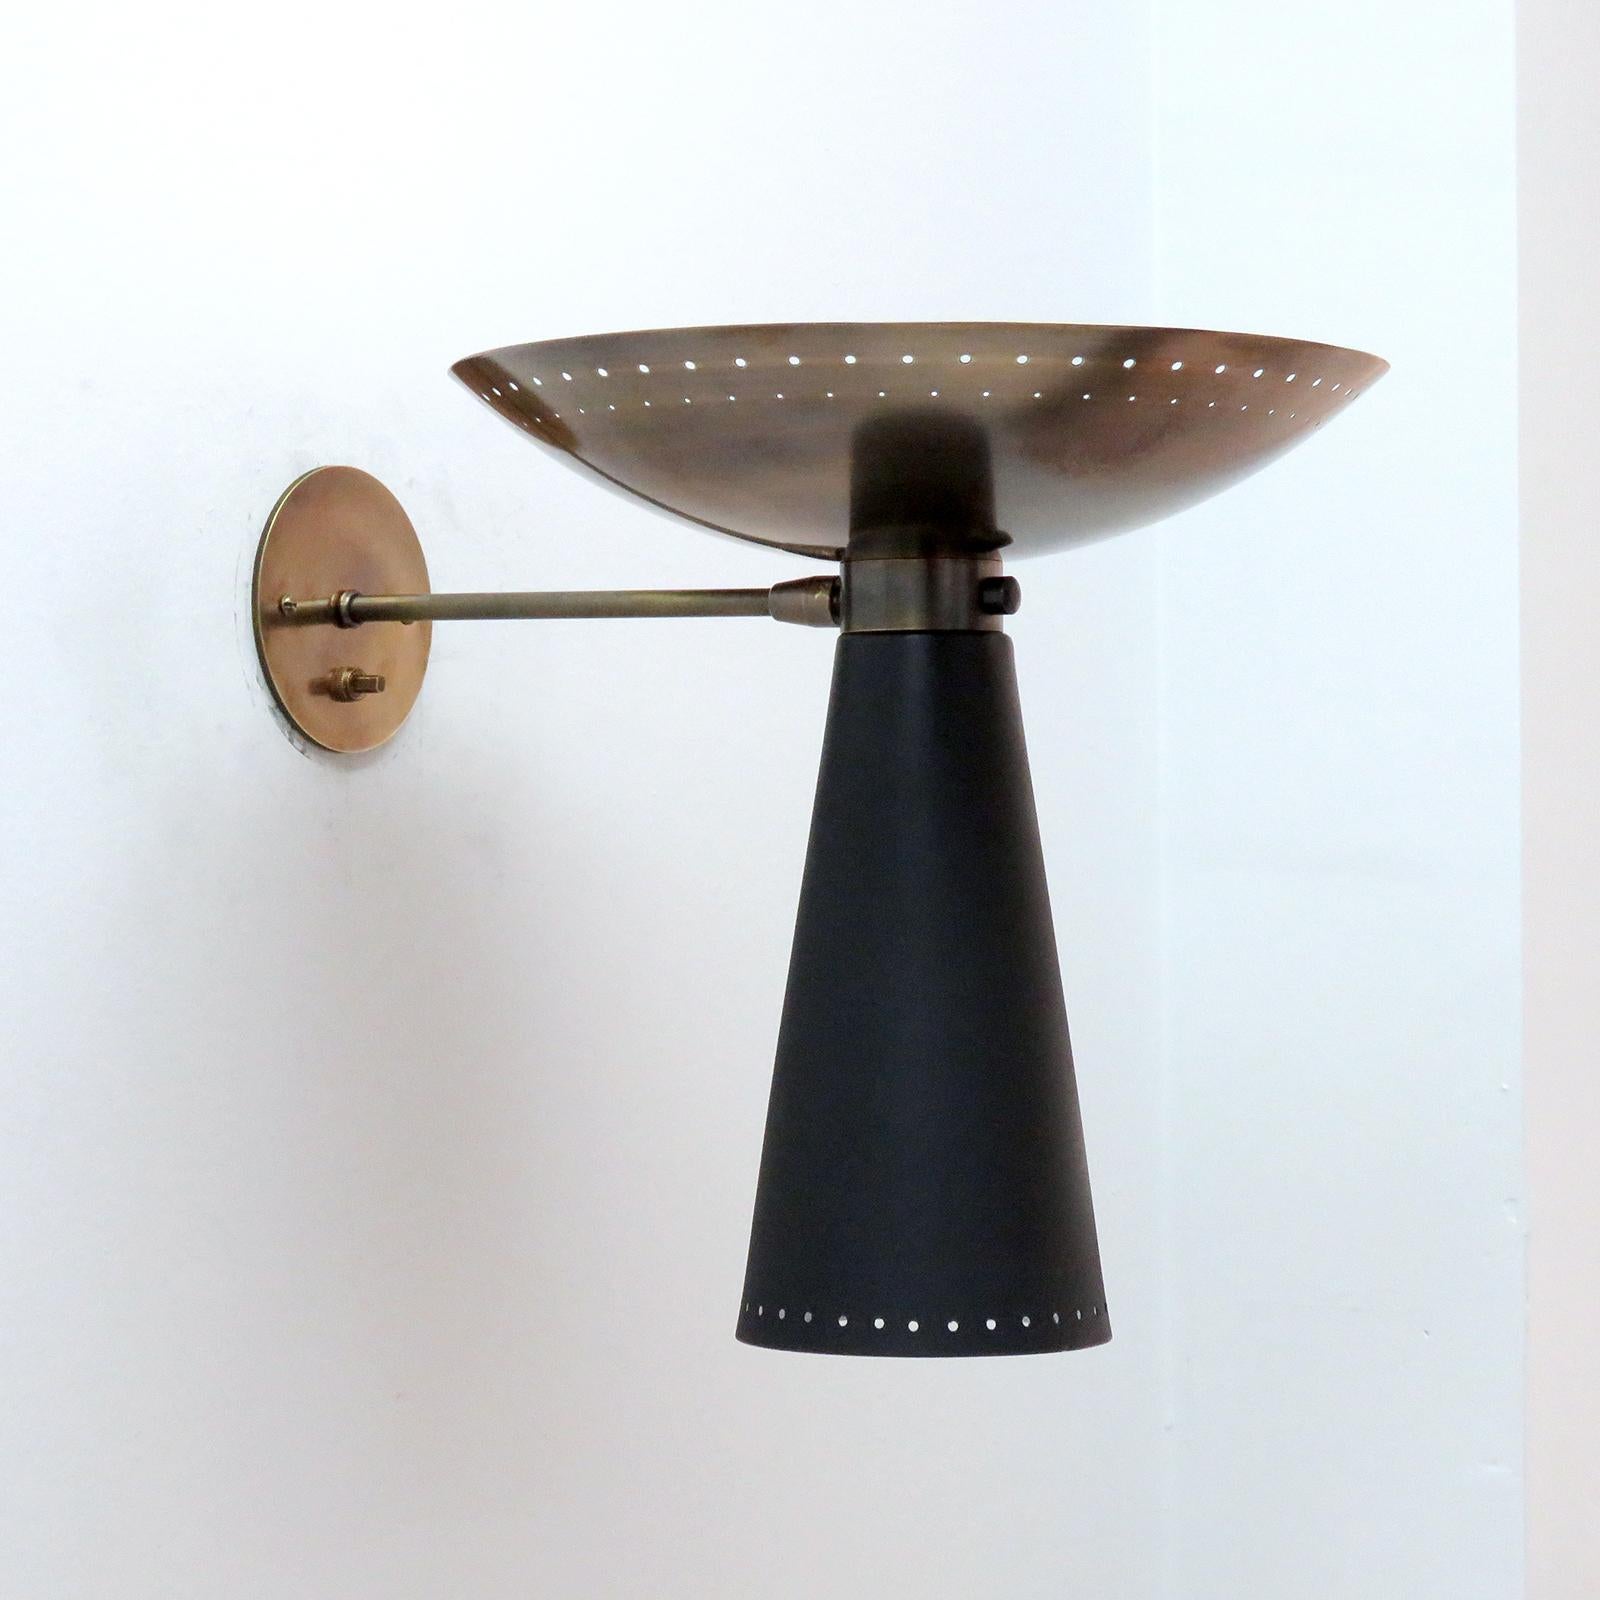 Elegant articulate Calice wall lights designed by Gallery L7, handcrafted and finished in Los Angeles from American brass, with an aged brass up-light and a black enameled down-light. Perforations along the rims and on/off switch on the solid brass